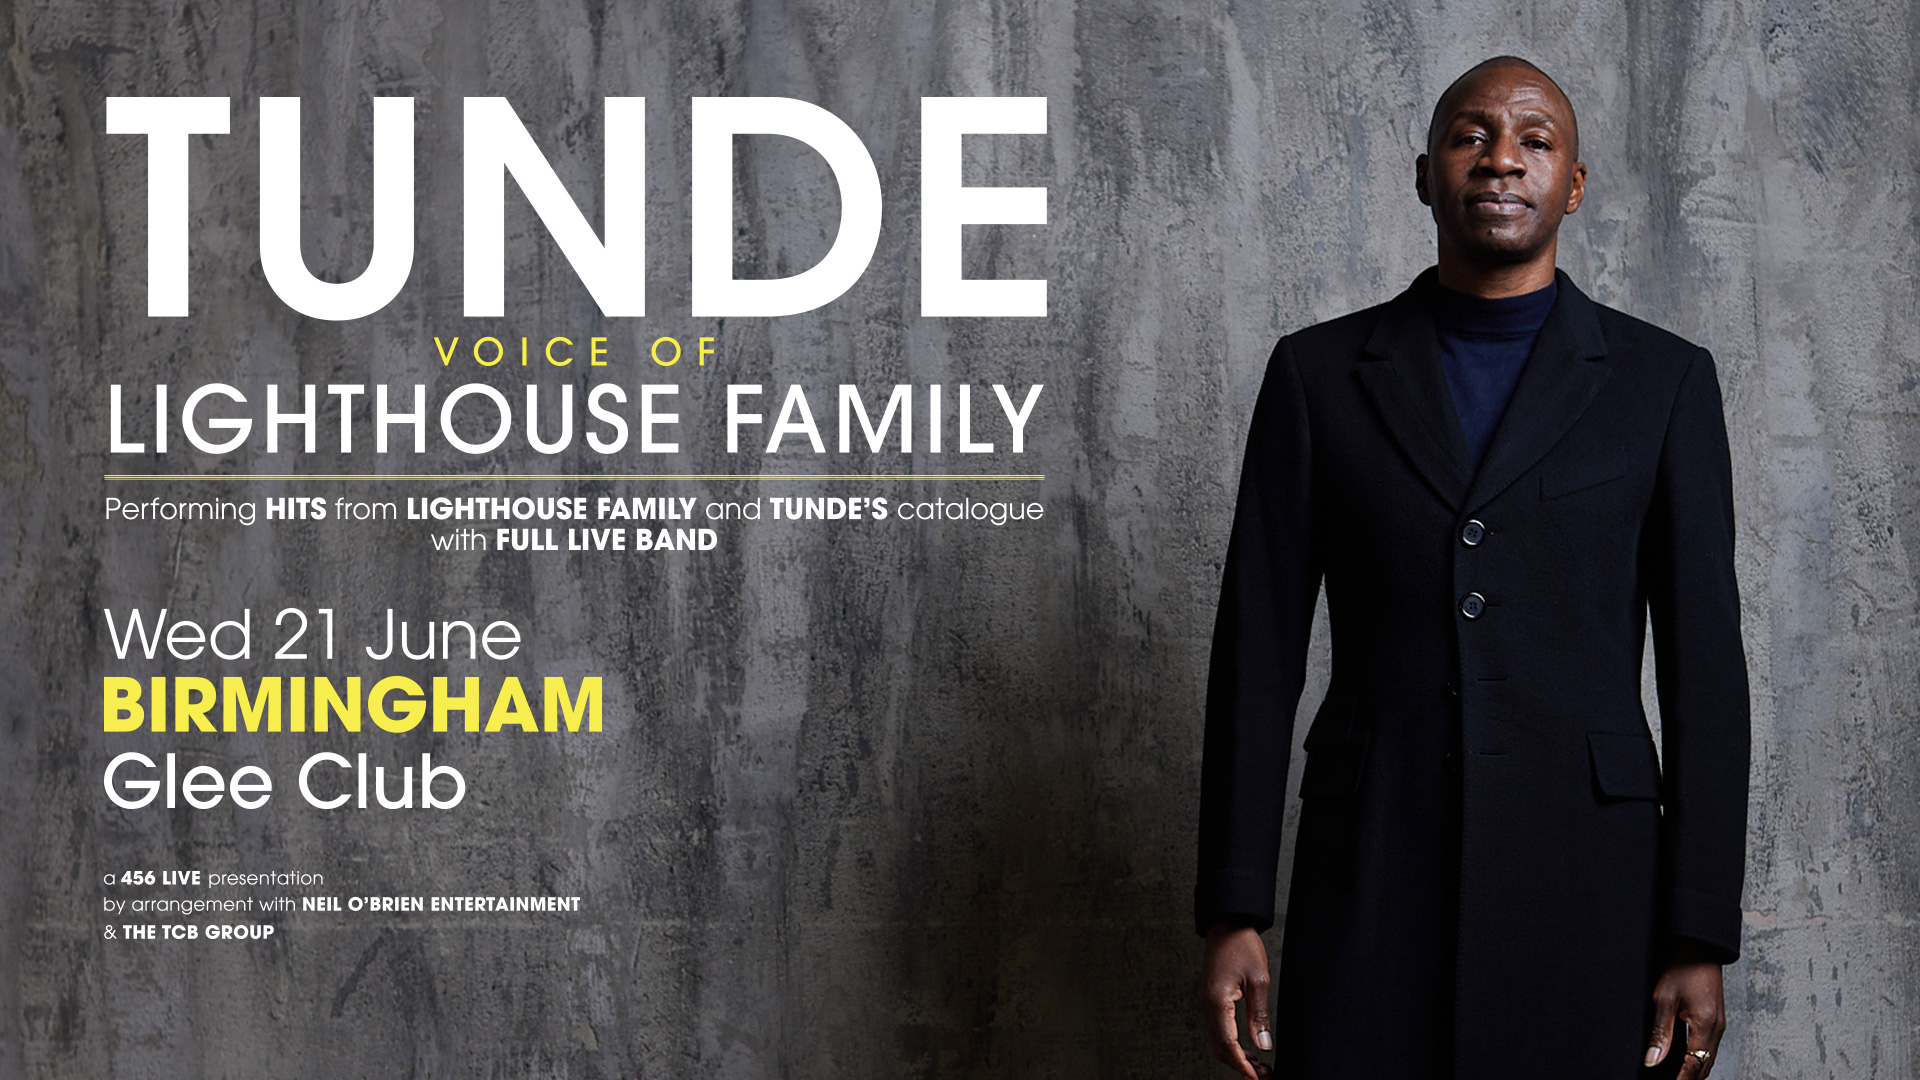 Tunde (Voice of Lighthouse Family)